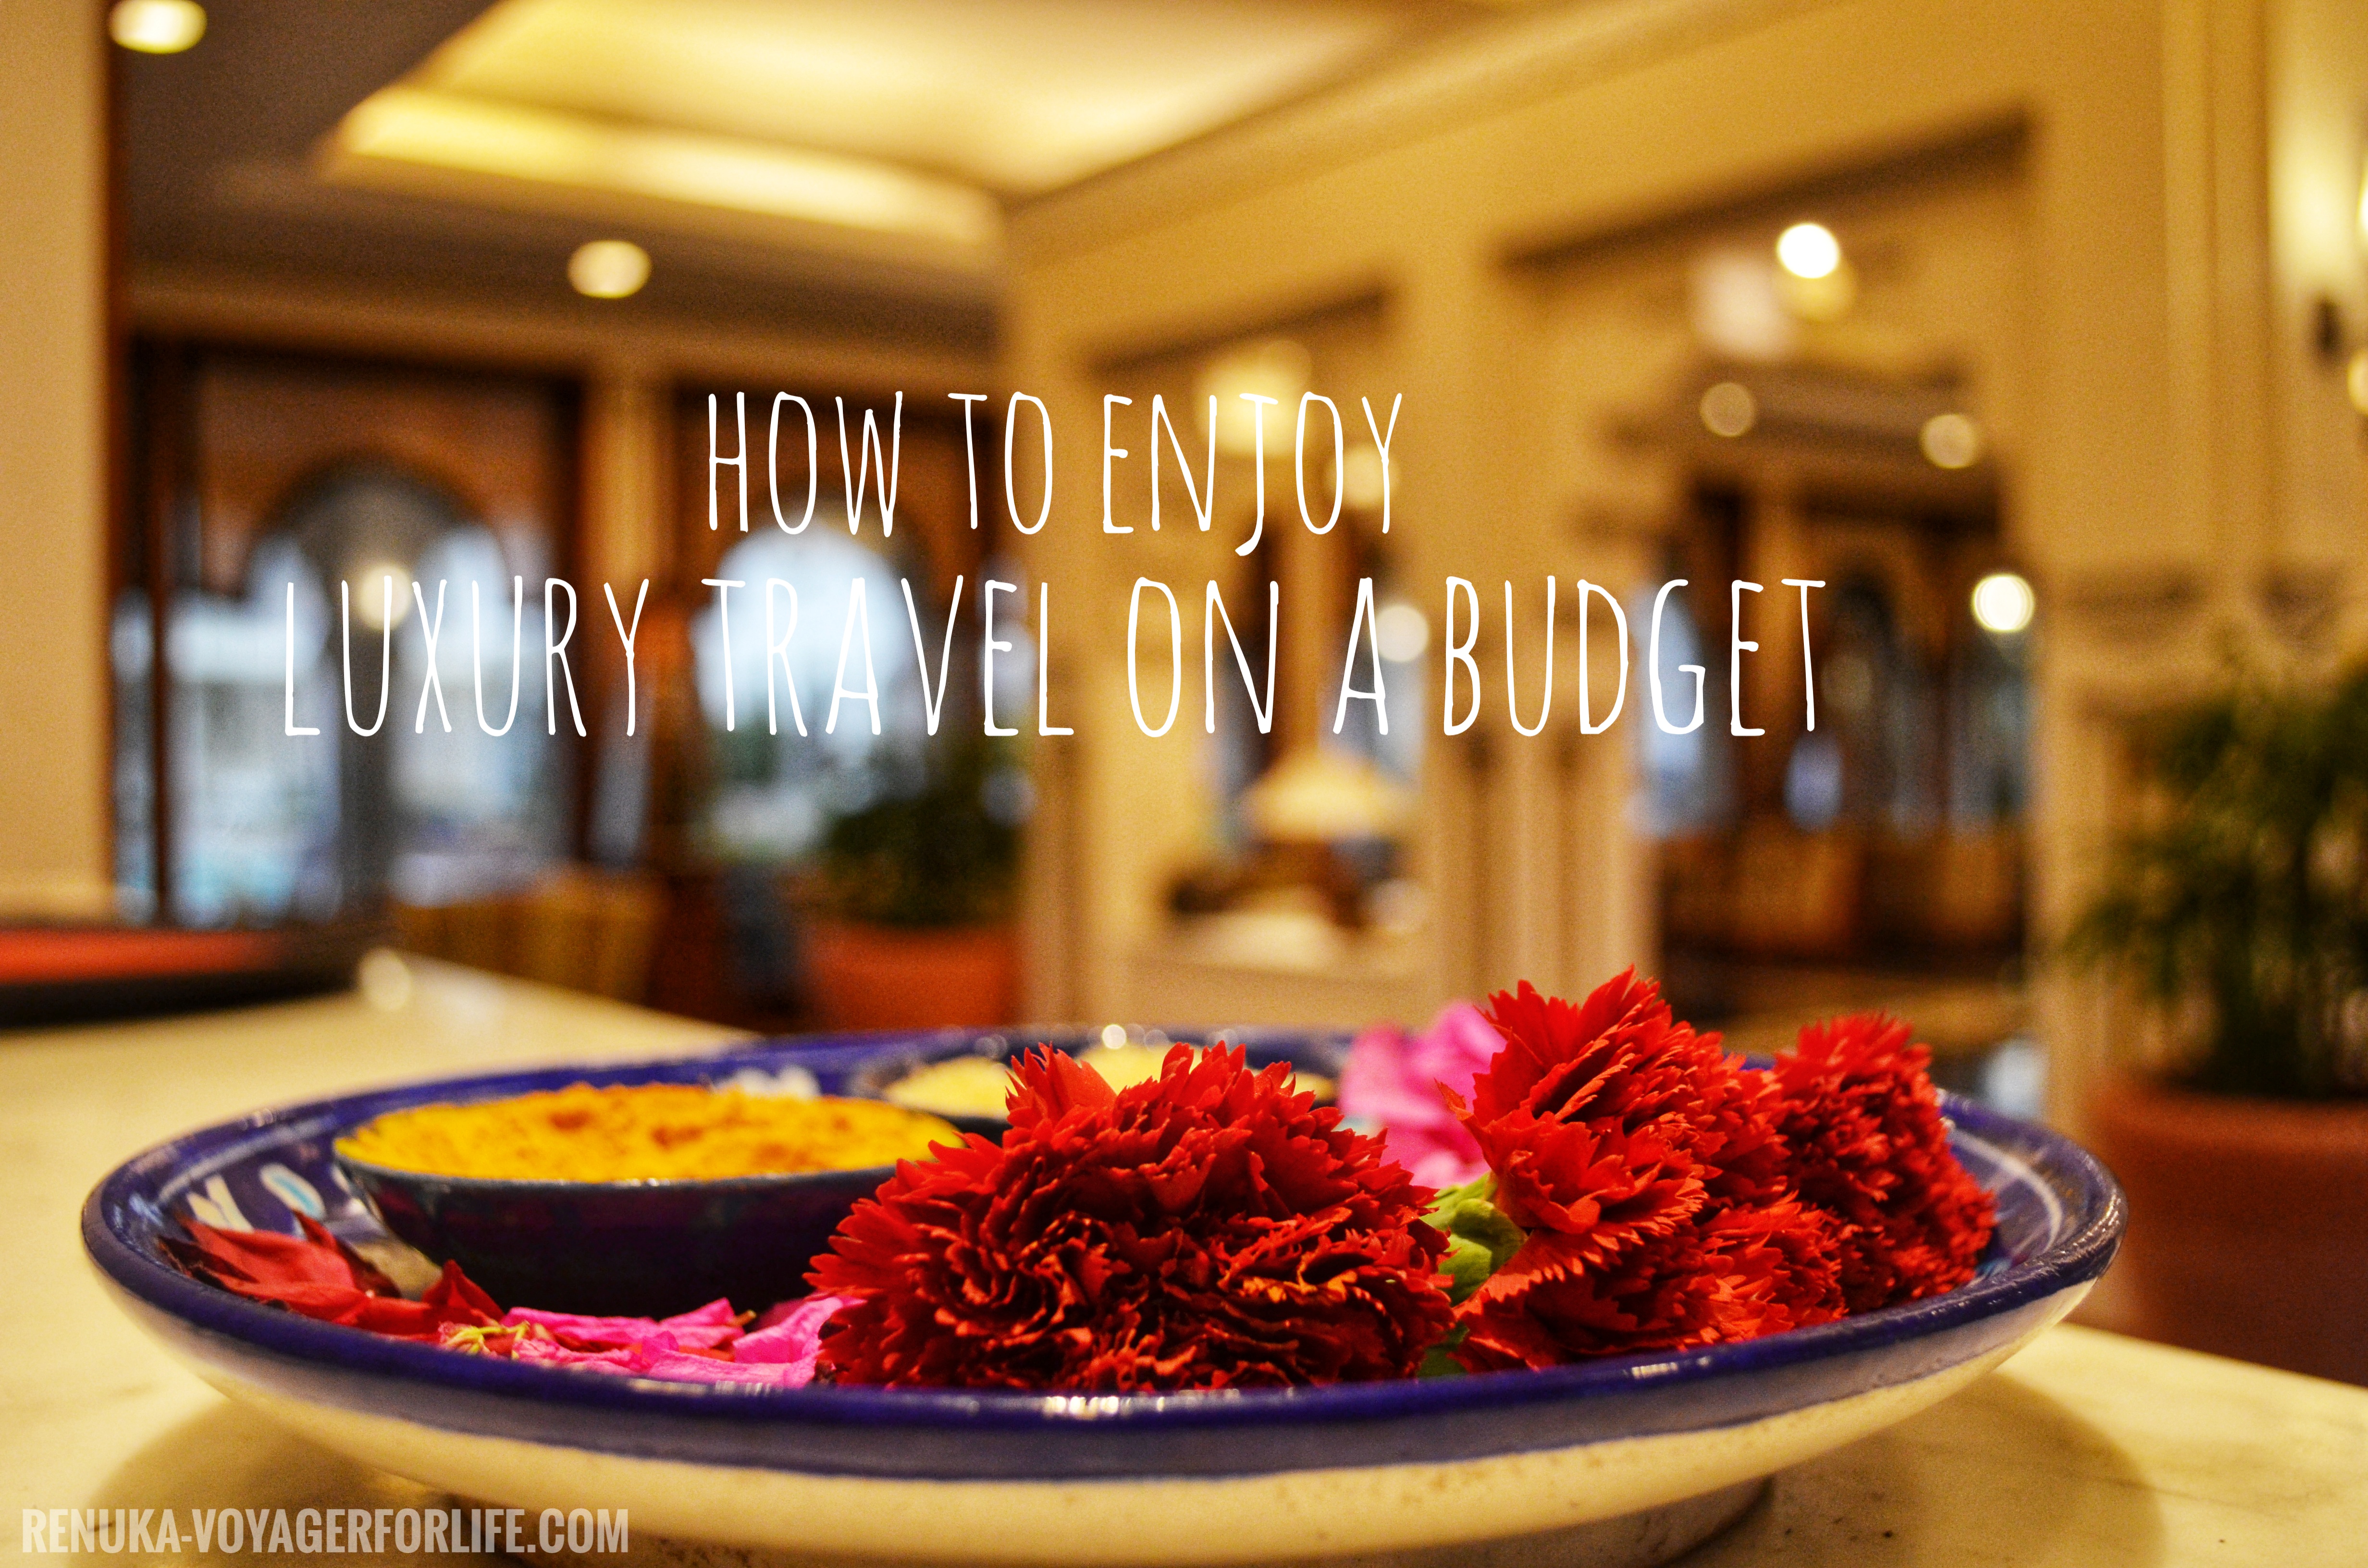 IMG-Tips on how to enjoy luxury travel on a budget